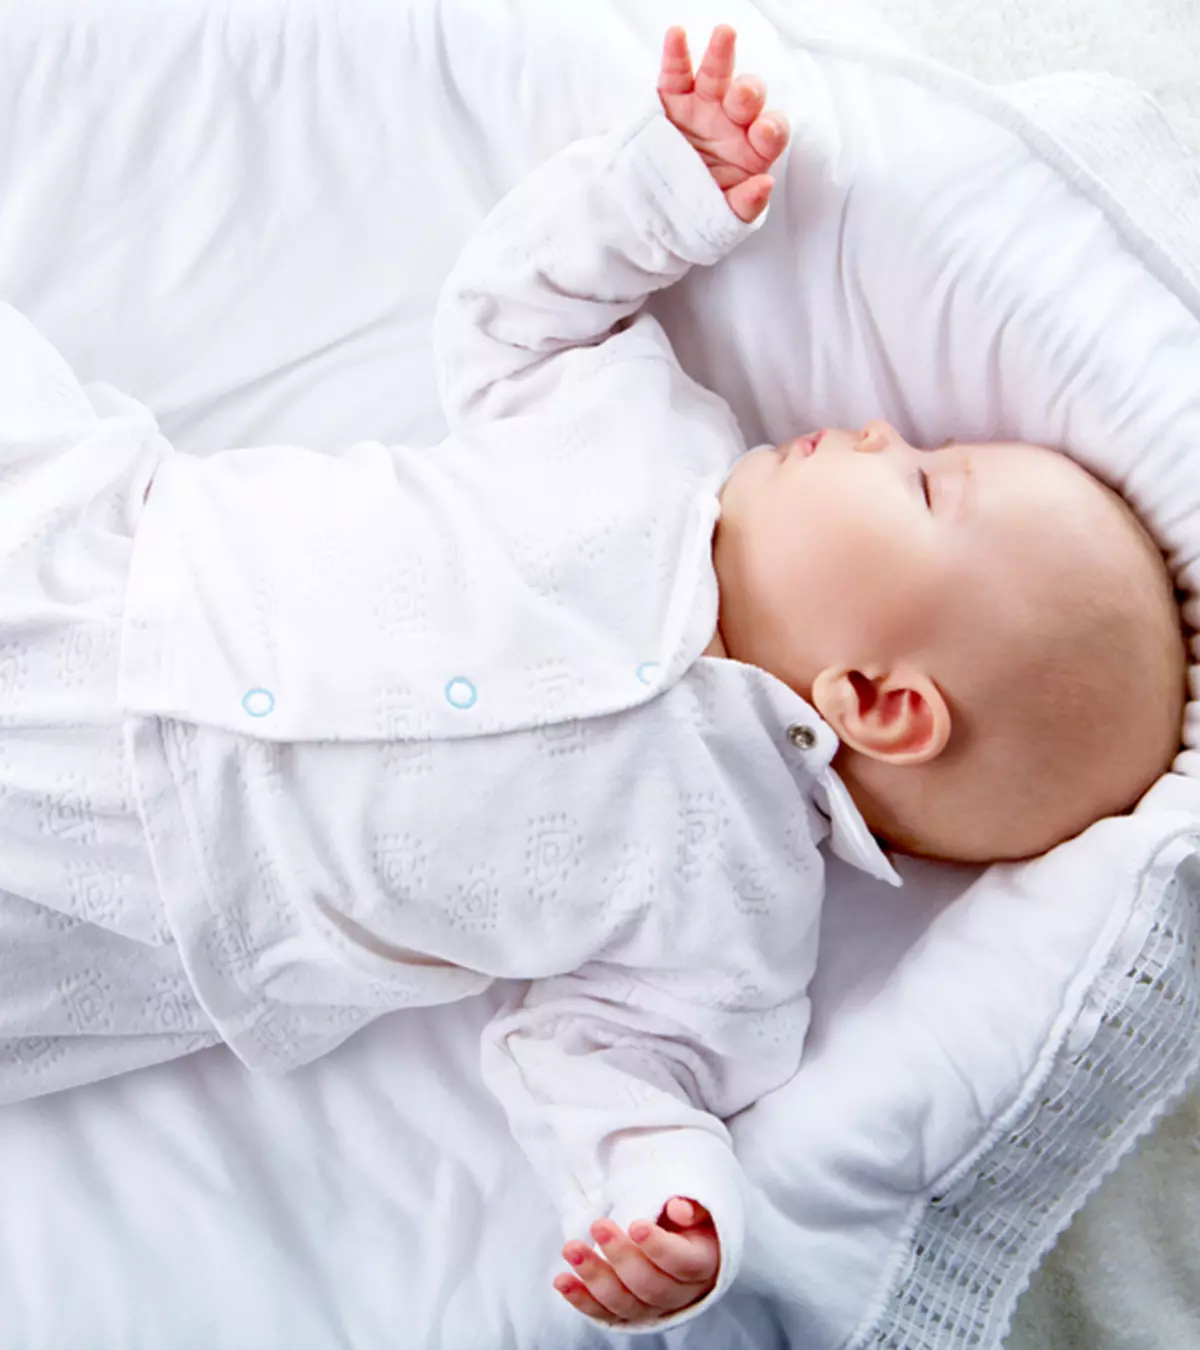 When Should Babies Sleep In Their Own Room? 